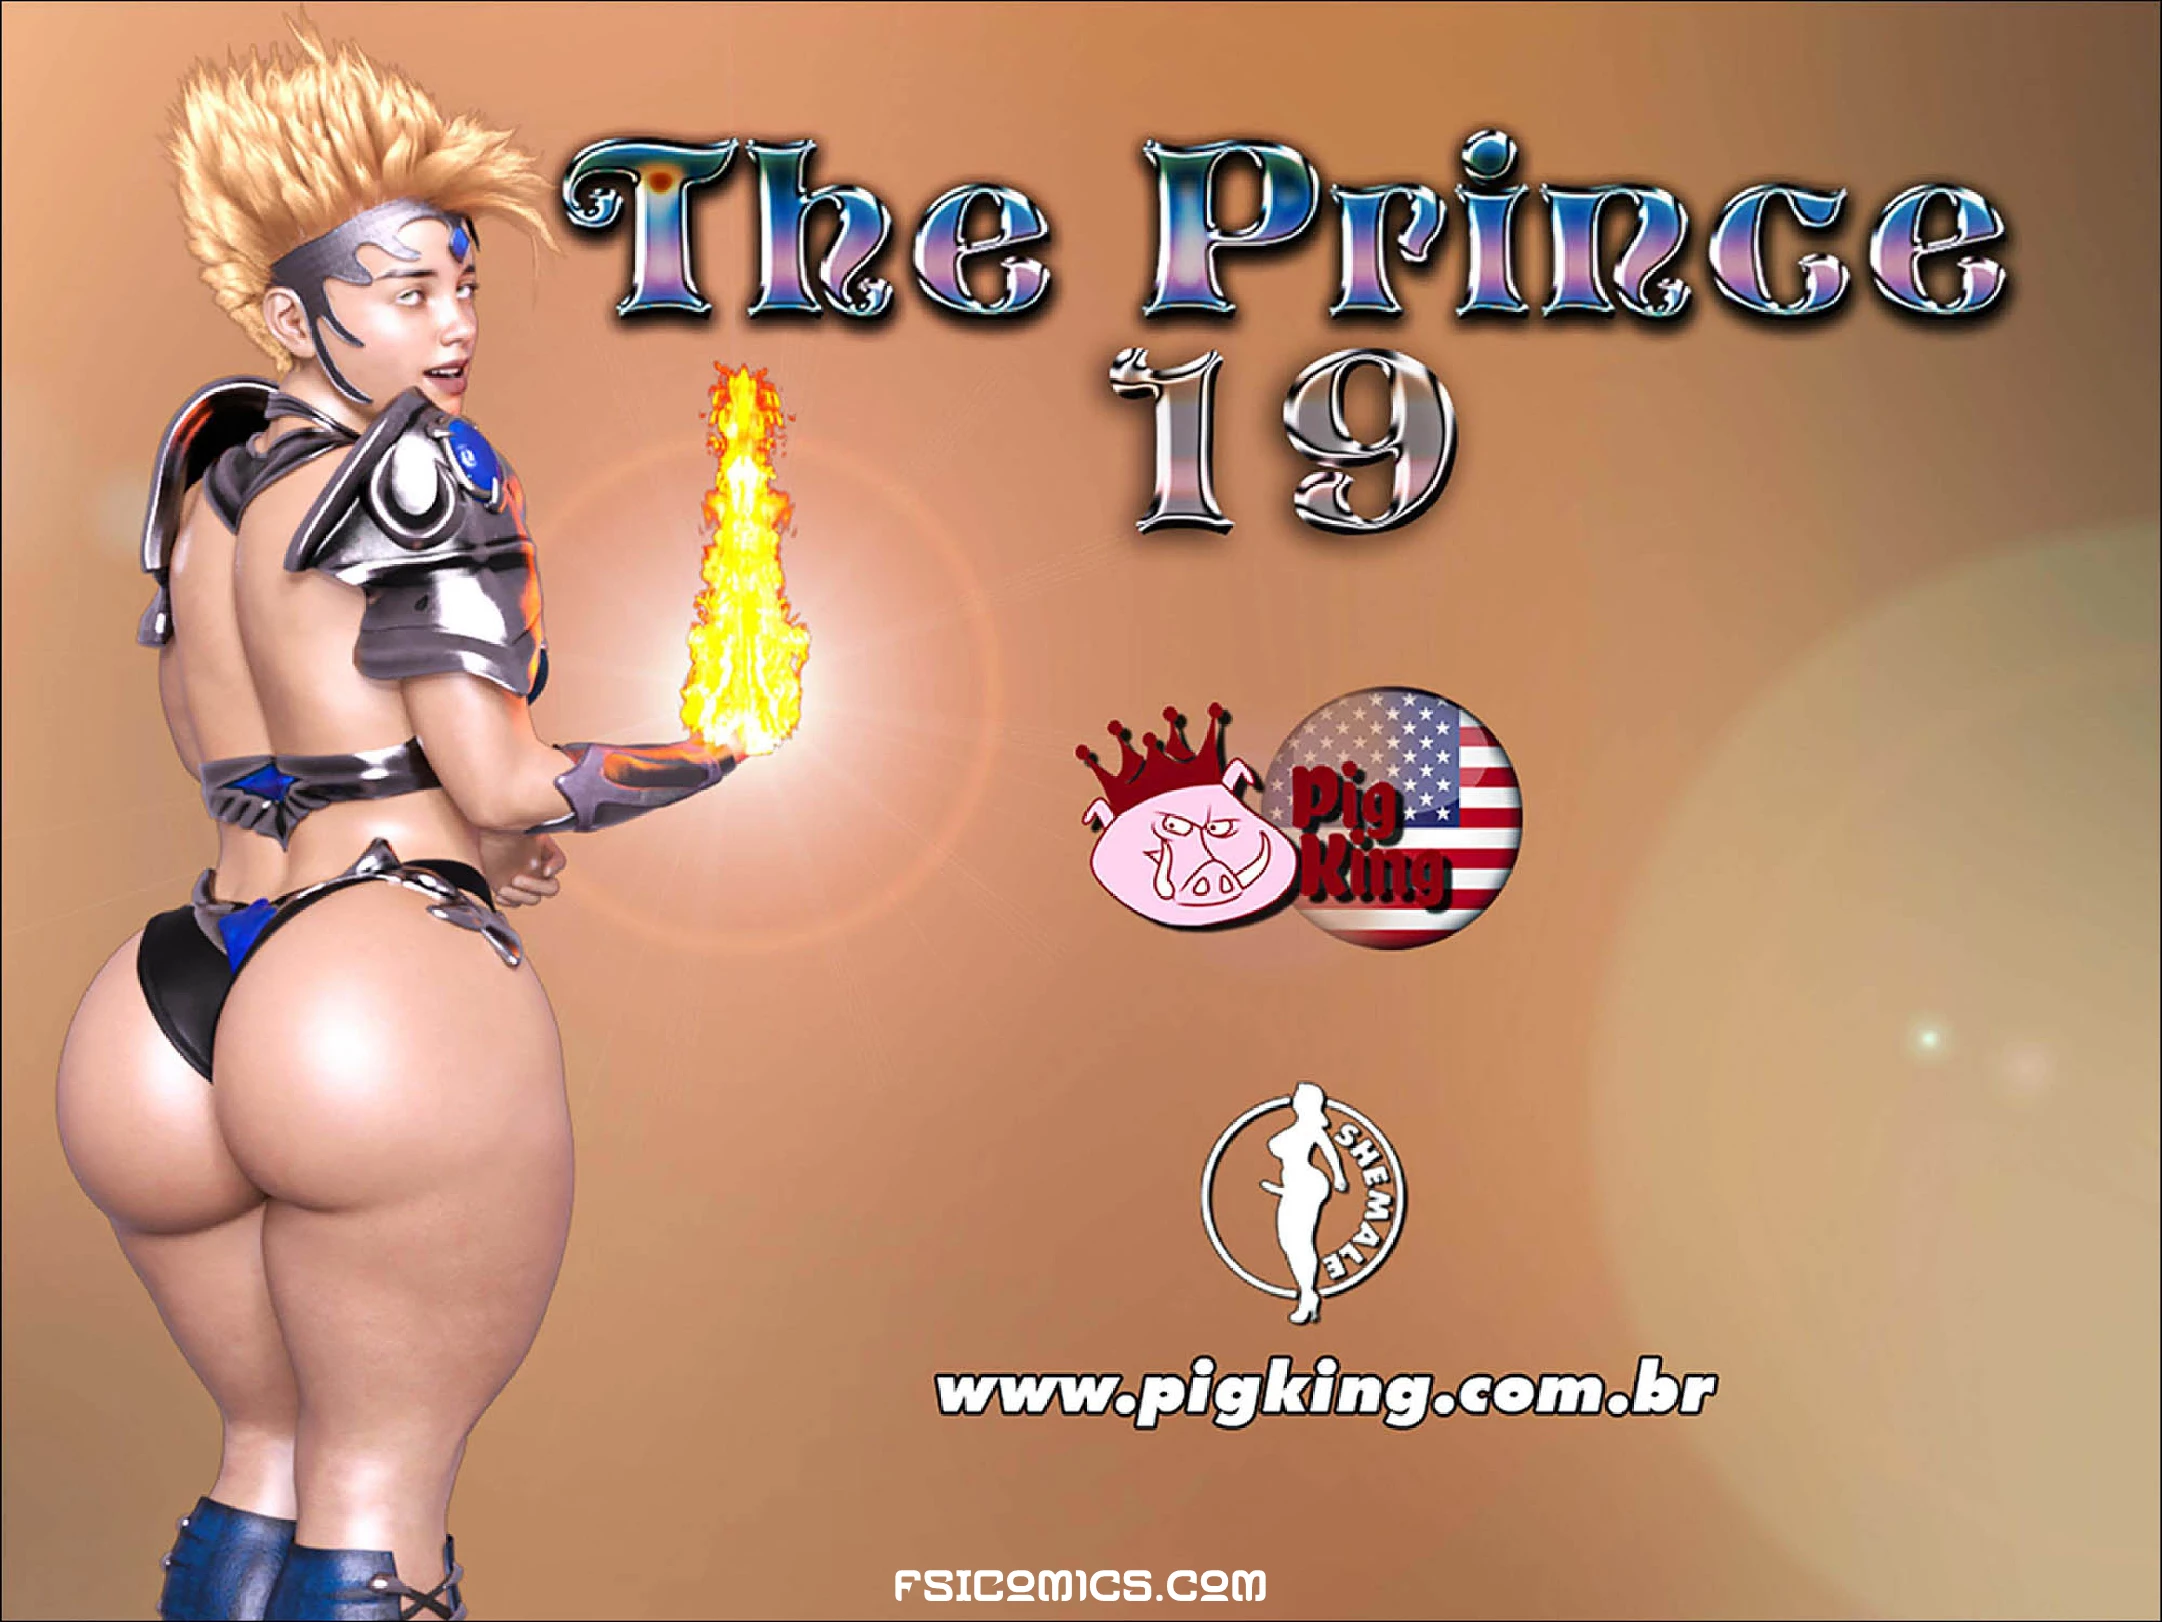 The Prince Chapter 19 – PigKing - 178 - FSIComics